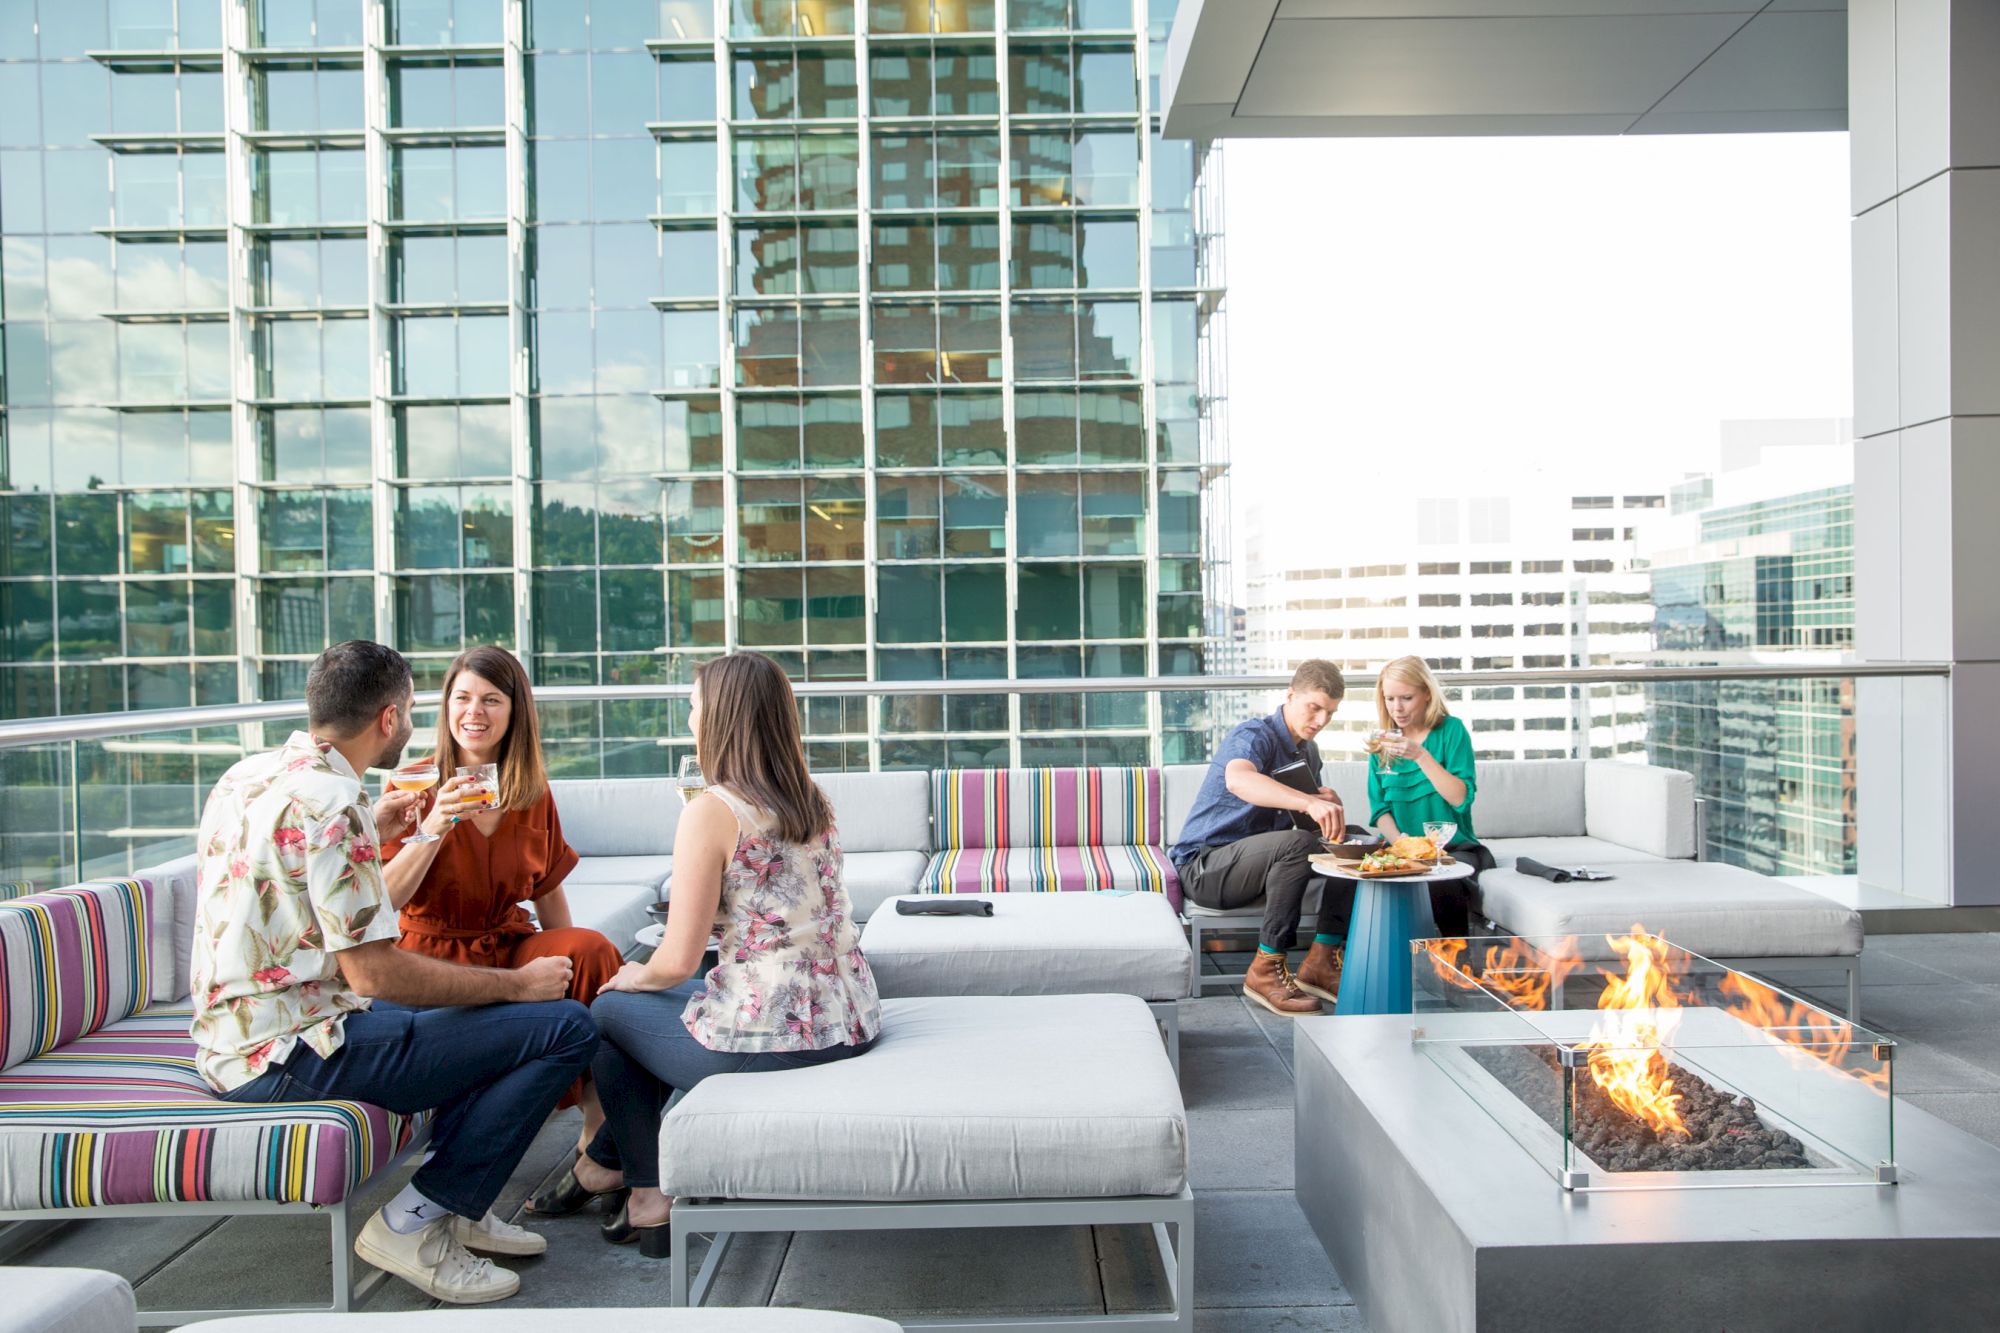 People sitting on a rooftop patio, conversing around modern fire pits, with city buildings in the background.